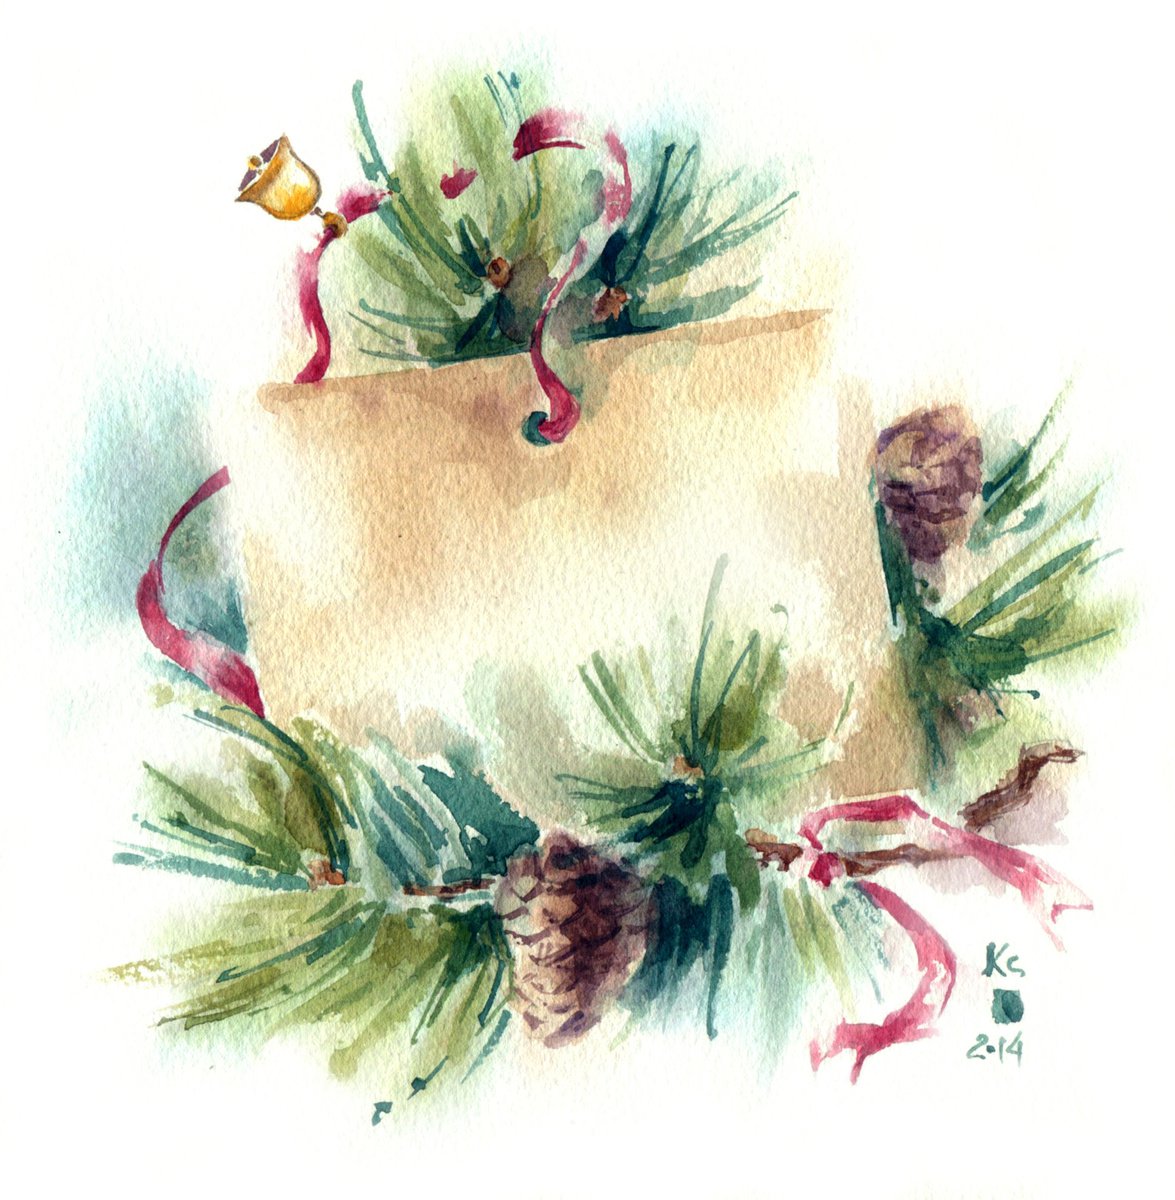 New year card with sprigs of spruce original watercolor artwork small format by Ksenia Selianko